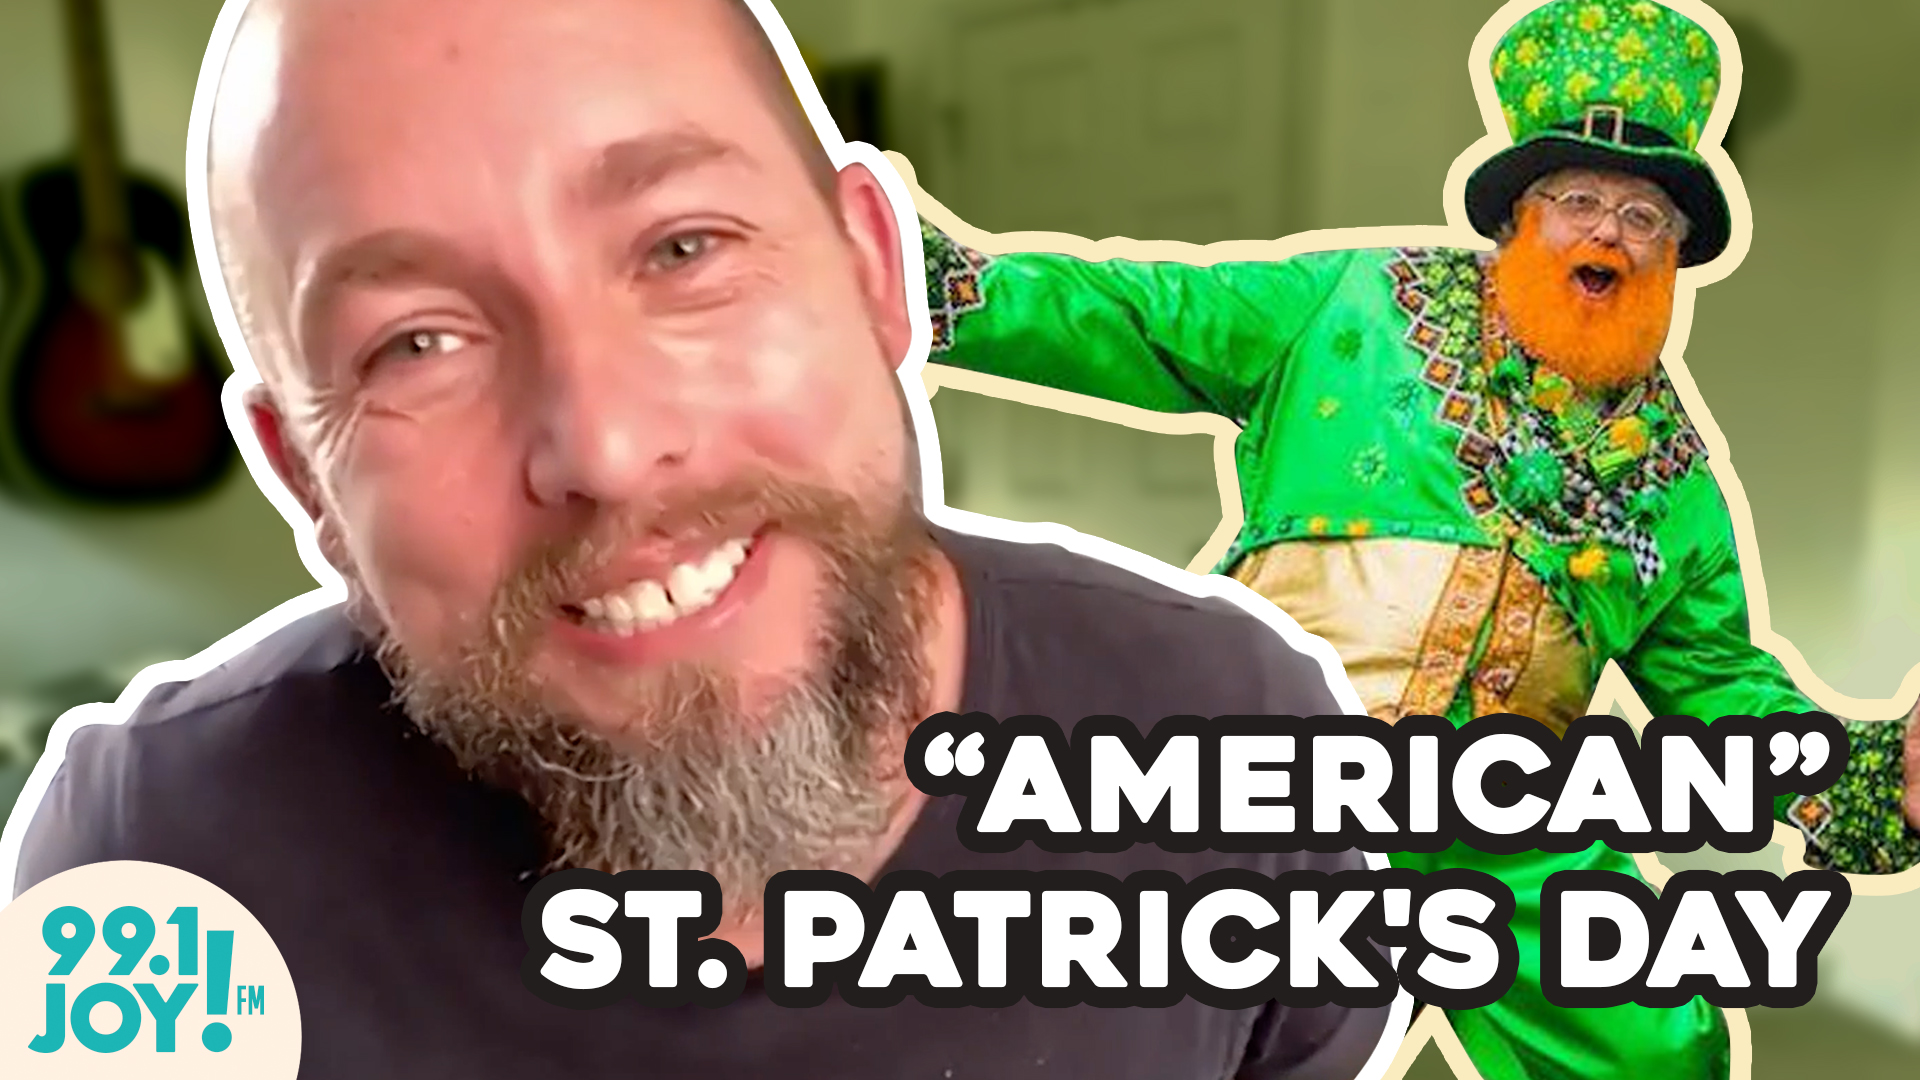 Darren (We Are Messengers) shares his view on “American” St. Patricks Day